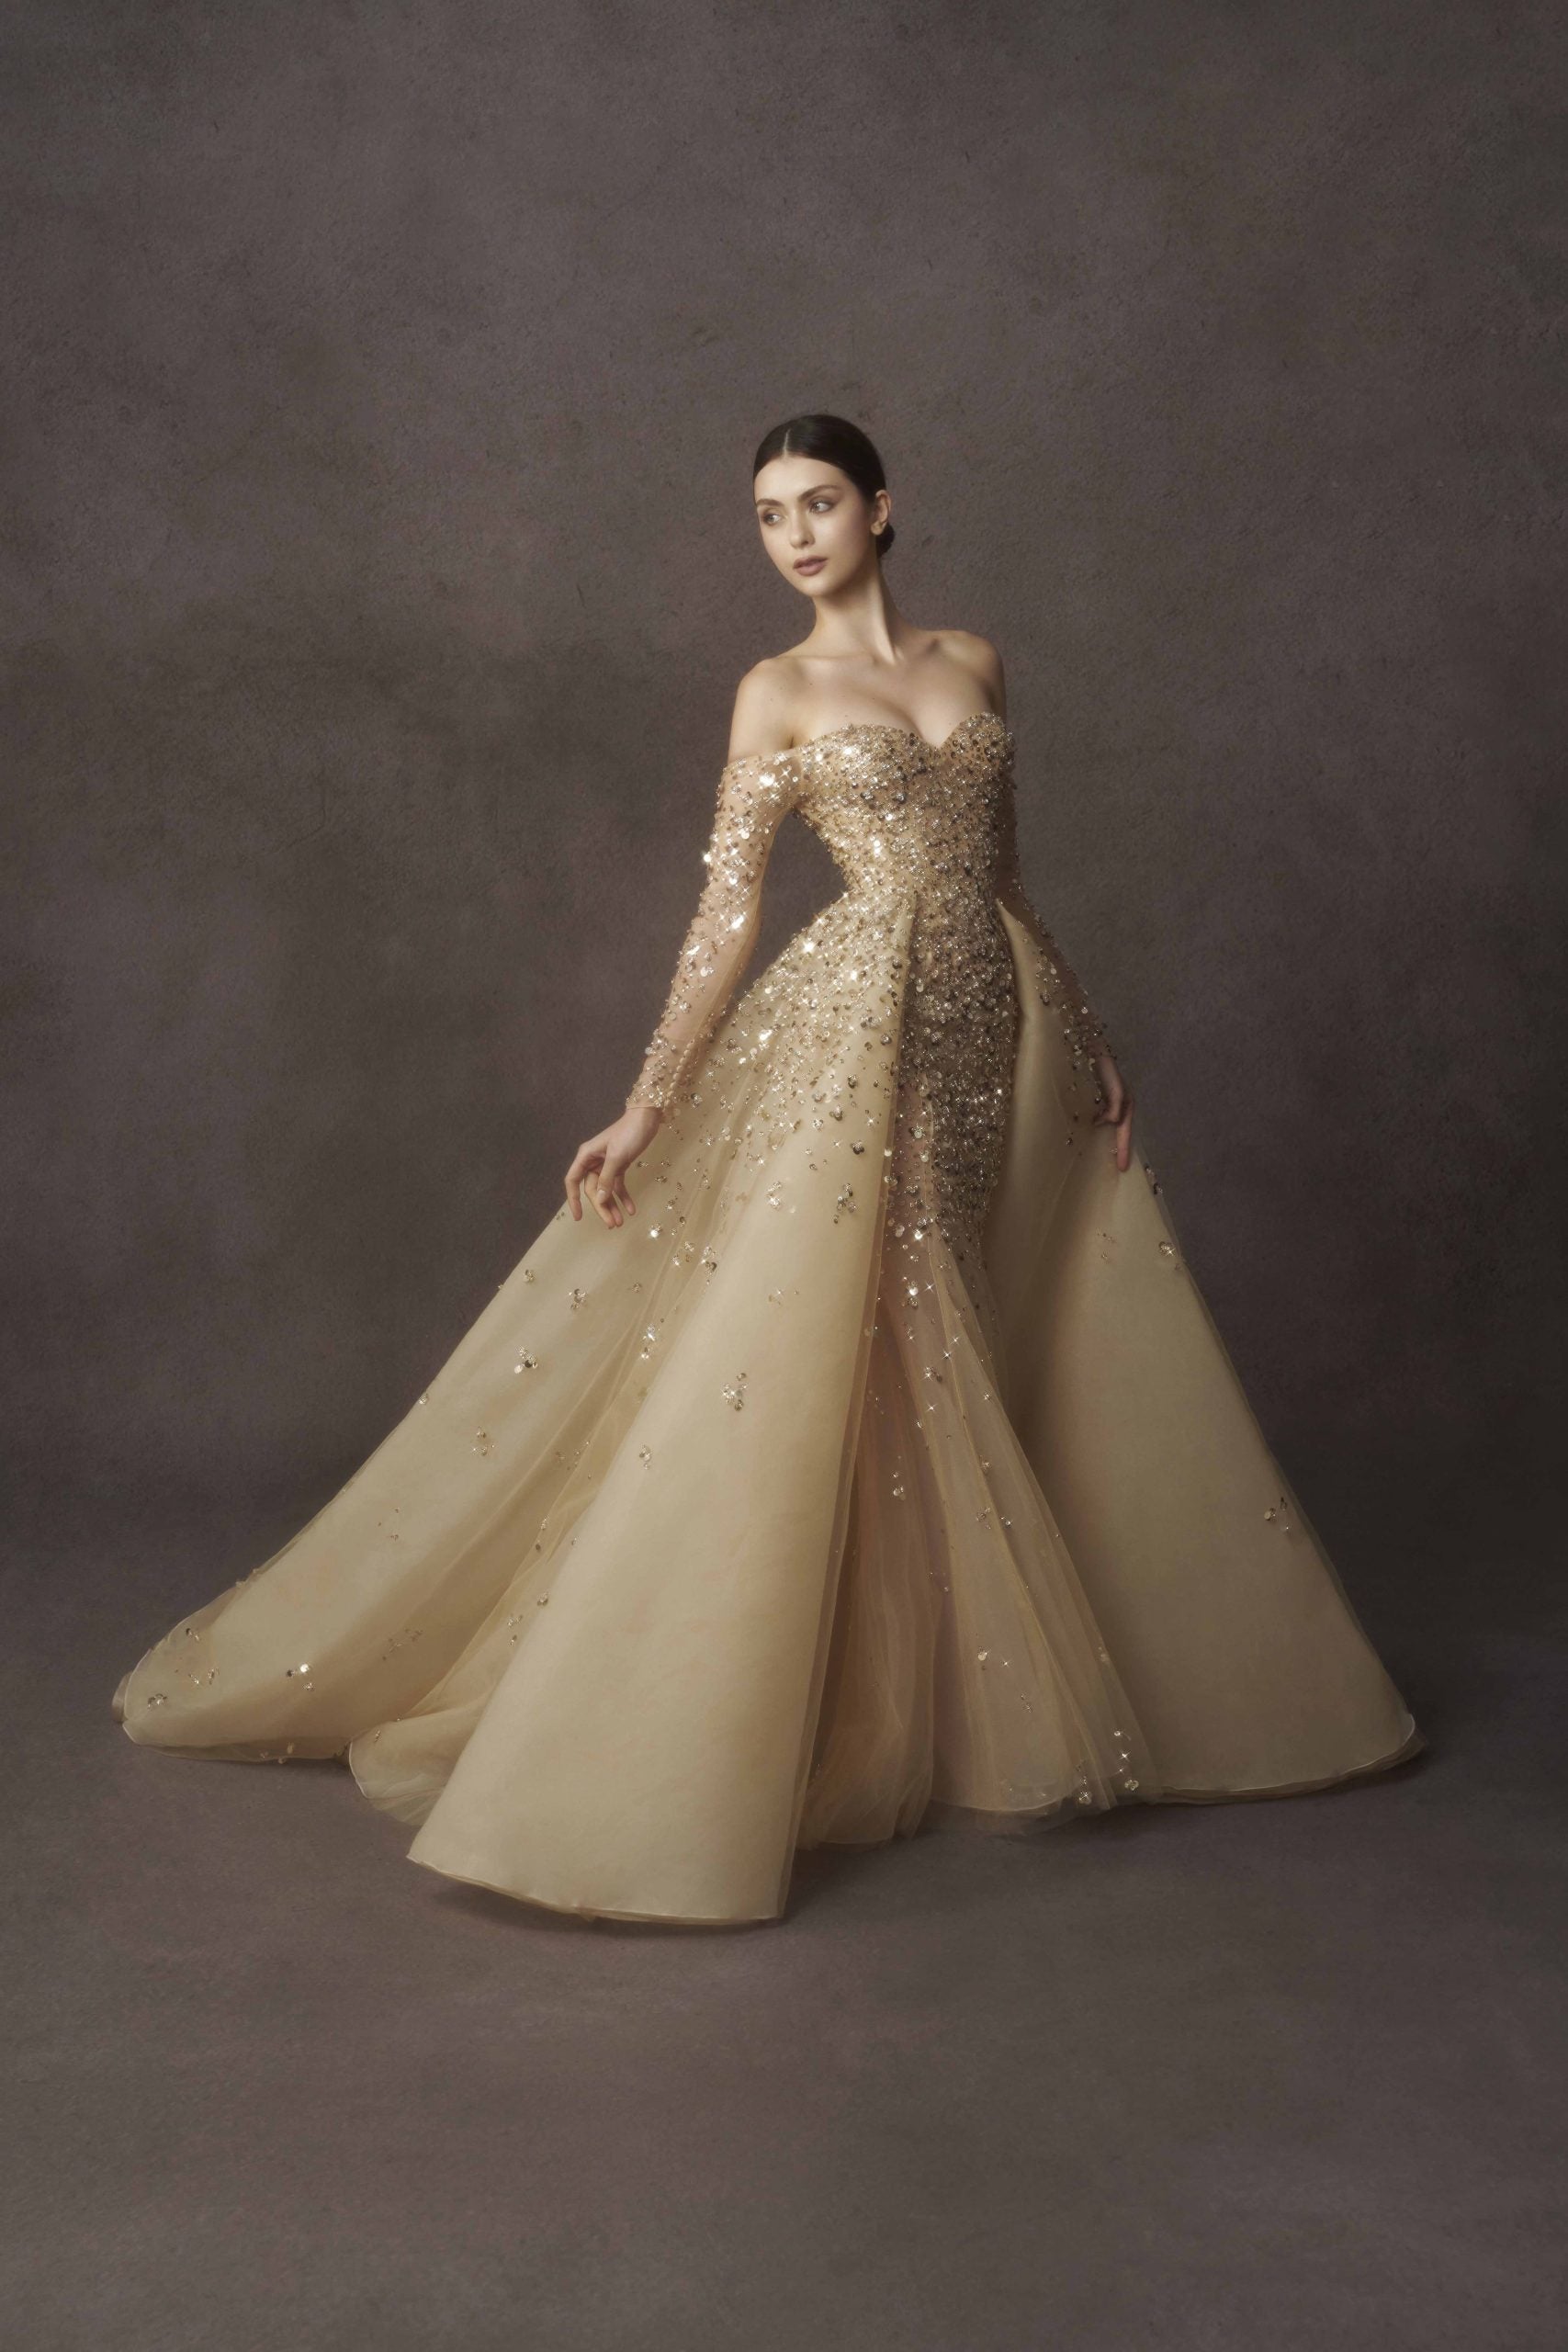 Detchable Matching Train For Long Sleeve Embellished Mermaid Gown by Nicole + Felicia - Image 2